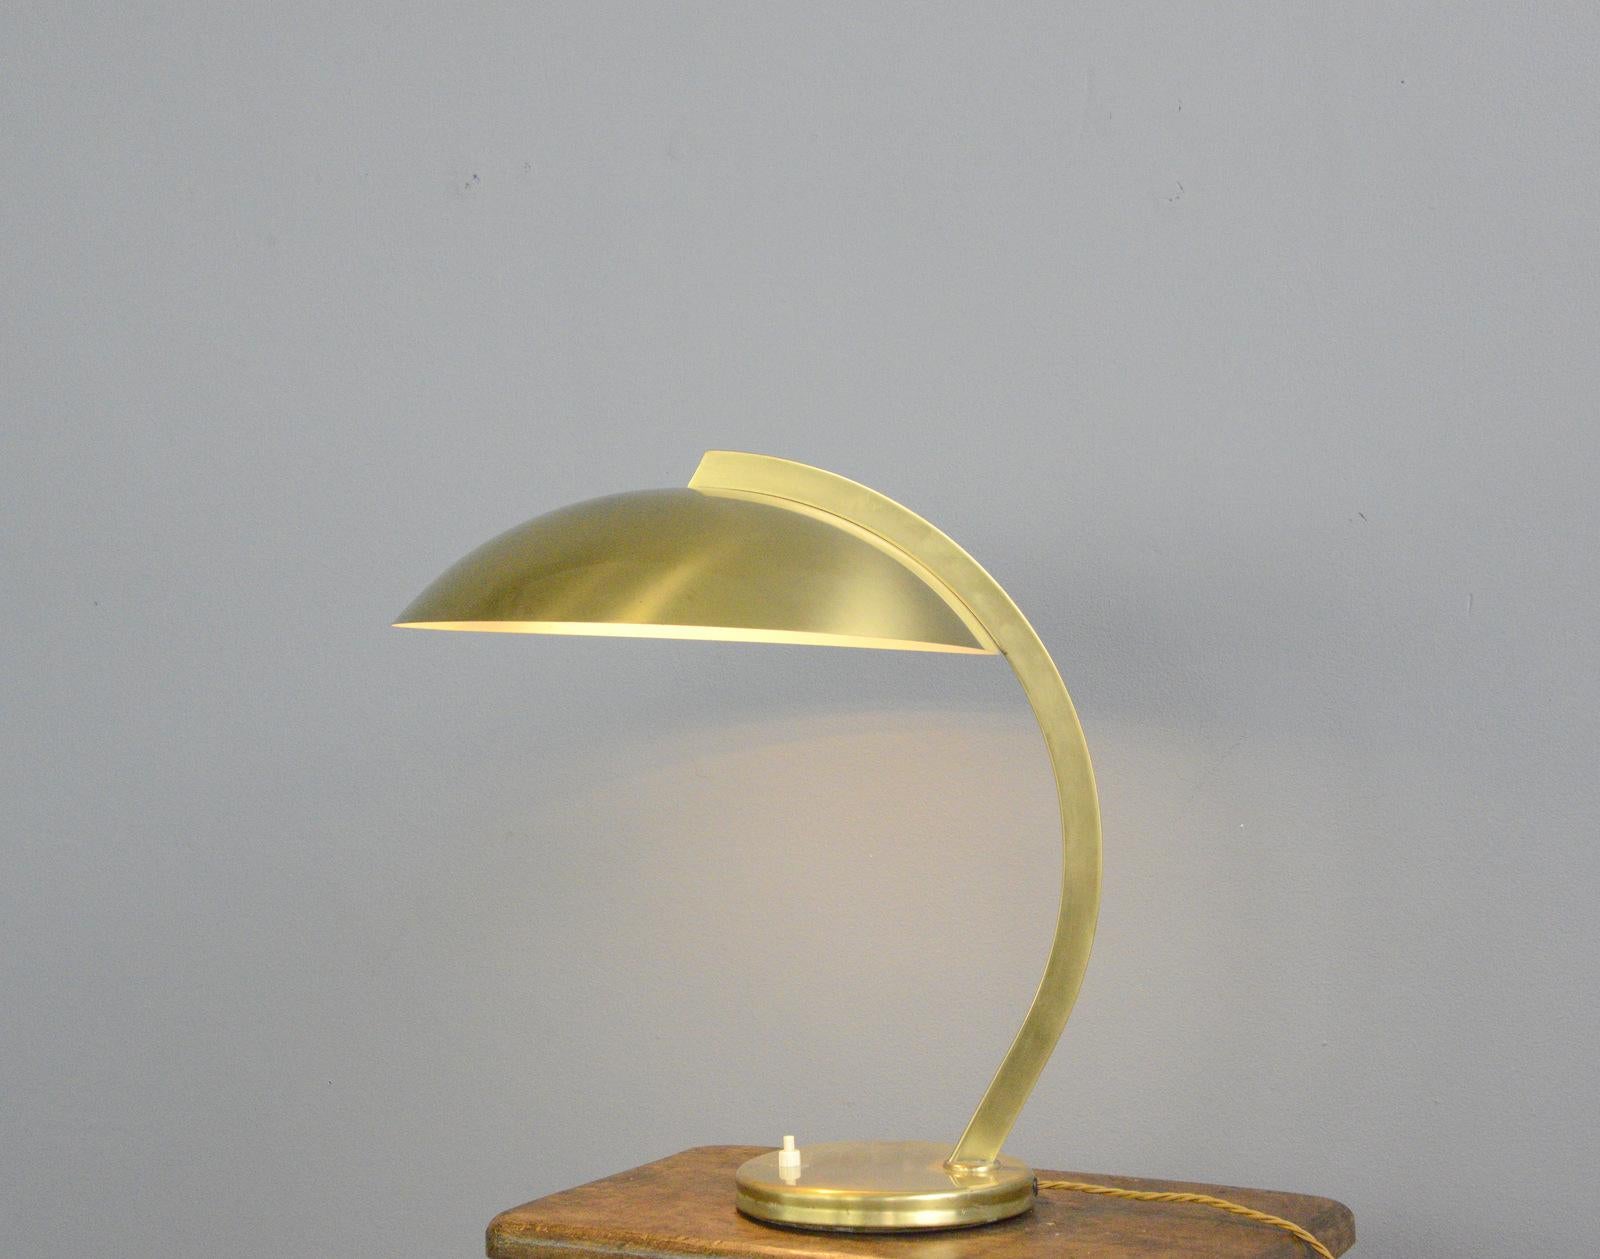 Bauhaus brass table lamp by Hillebrand, circa 1930s

- Fully brass
- Dual bulb holders
- Takes E27 fitting bulbs
- On/Off switch on the base
- Made by Hillebrand 
- German, 1930s
- Measures: 44cm tall x 36cm wide x 42cm